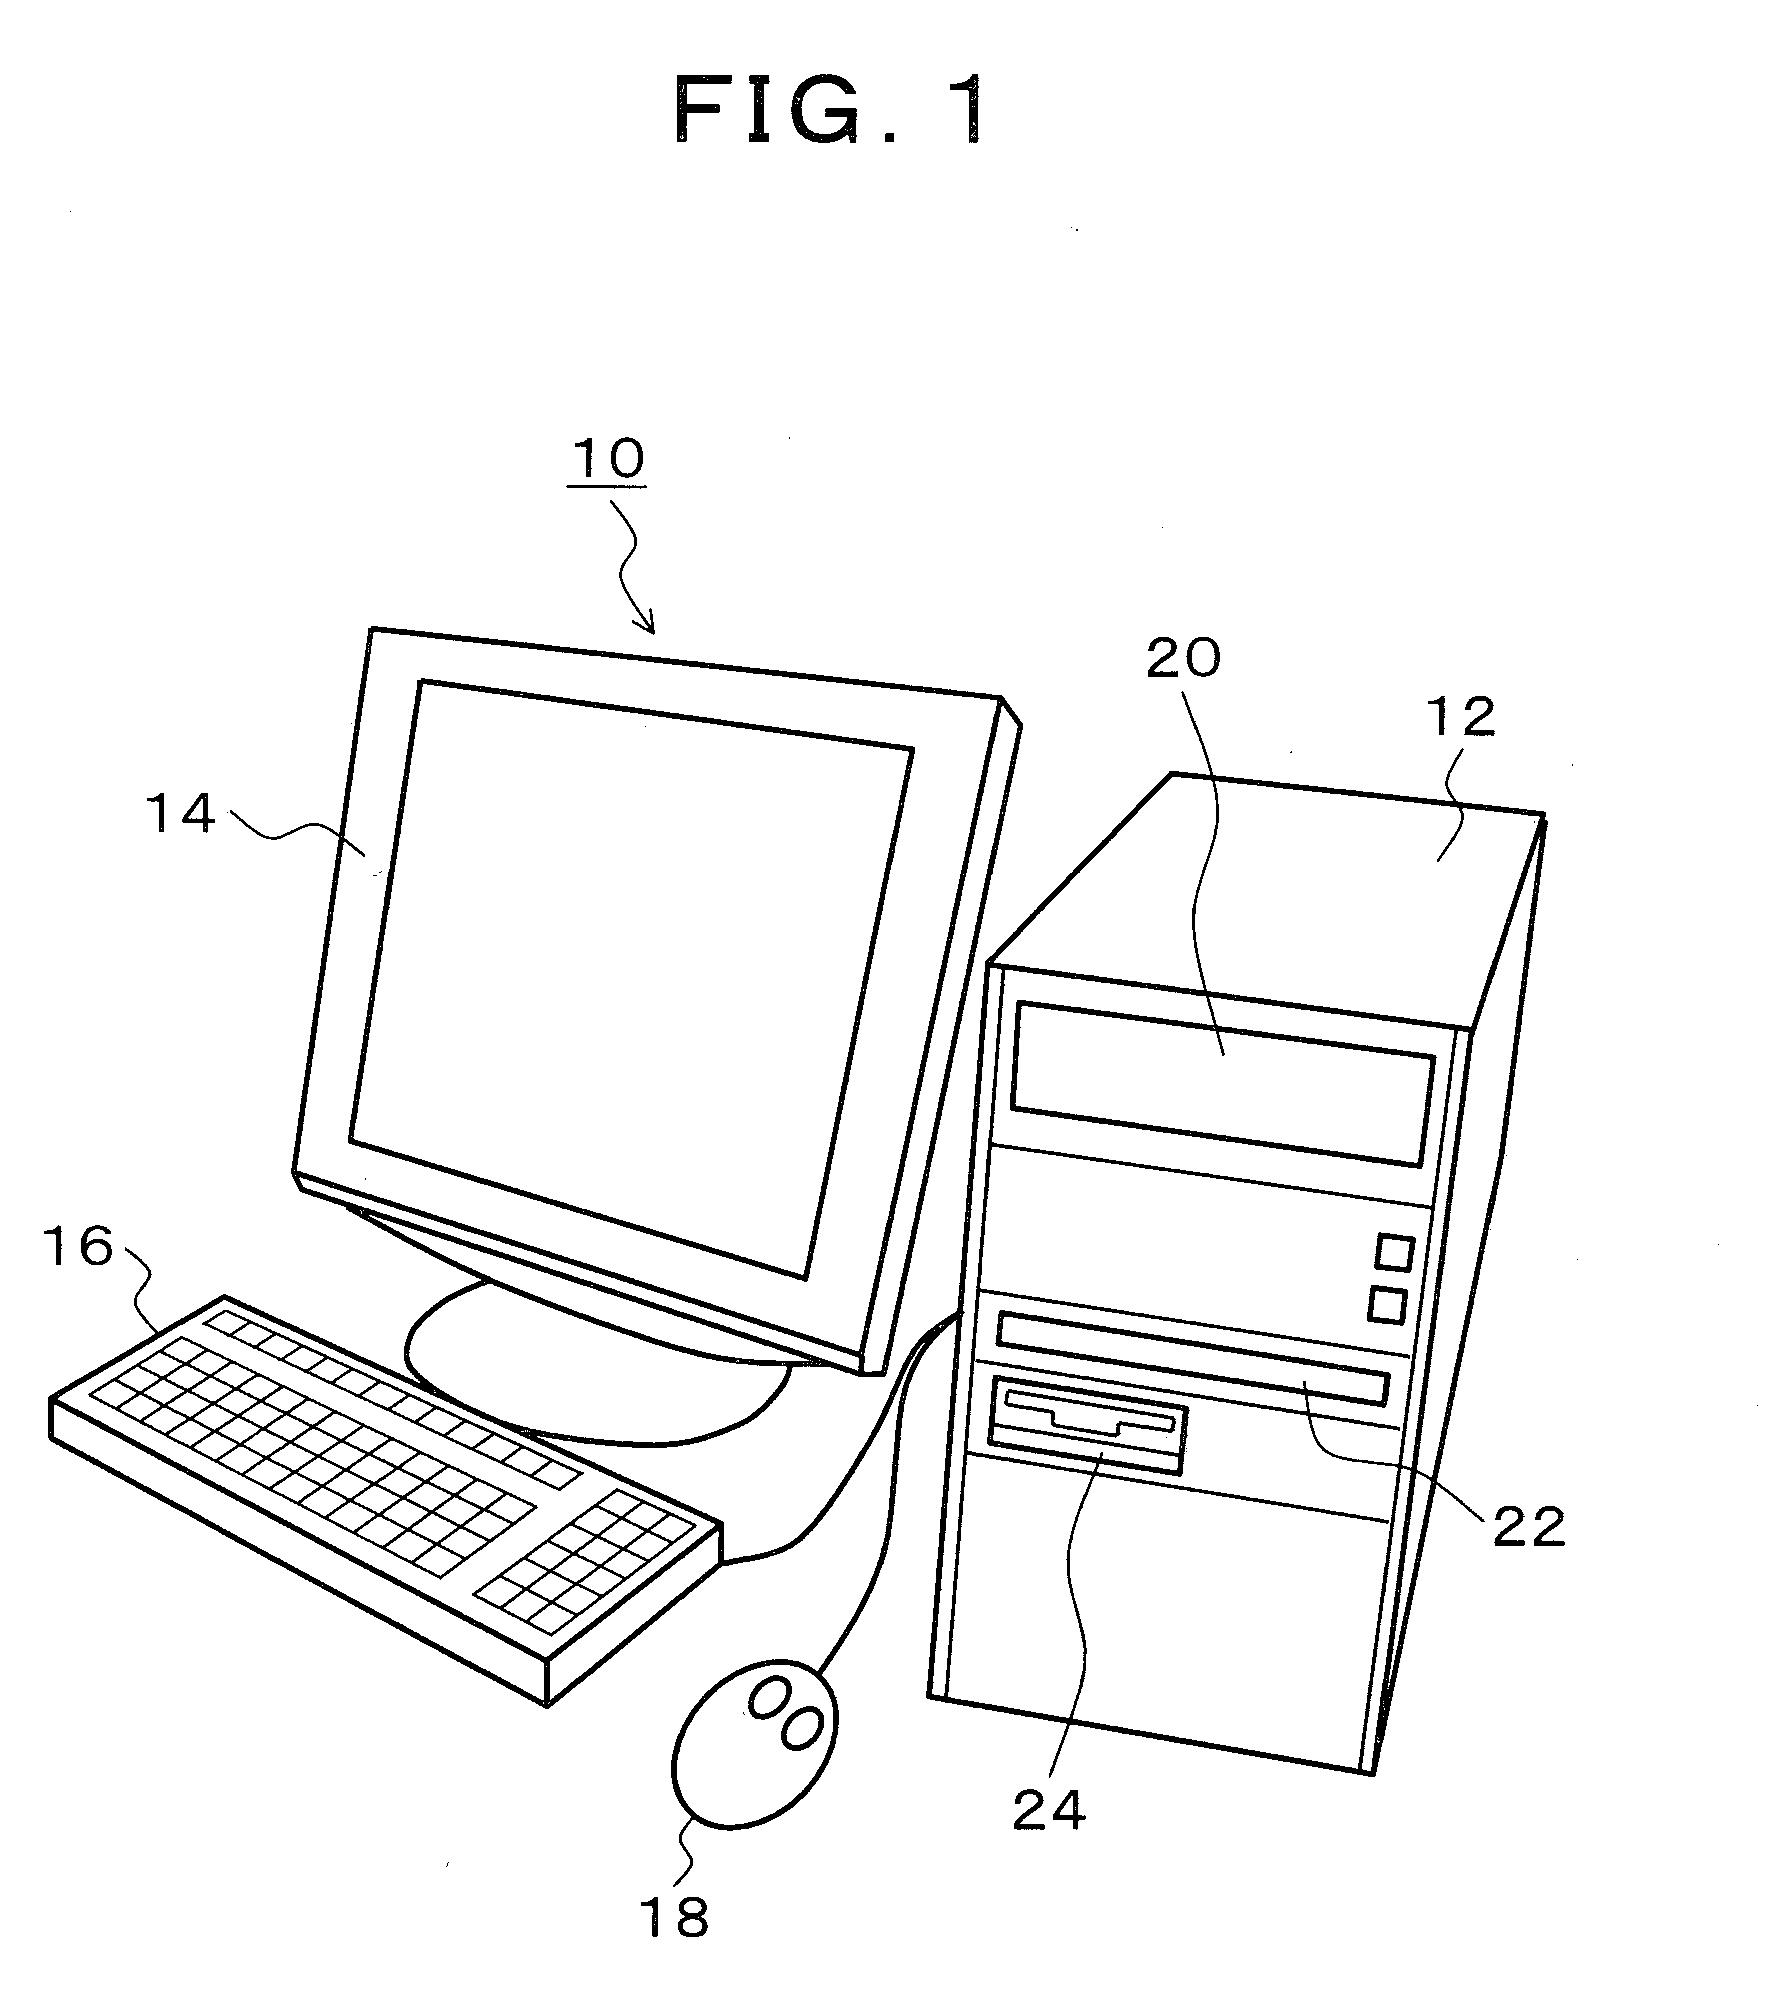 Computer and display device